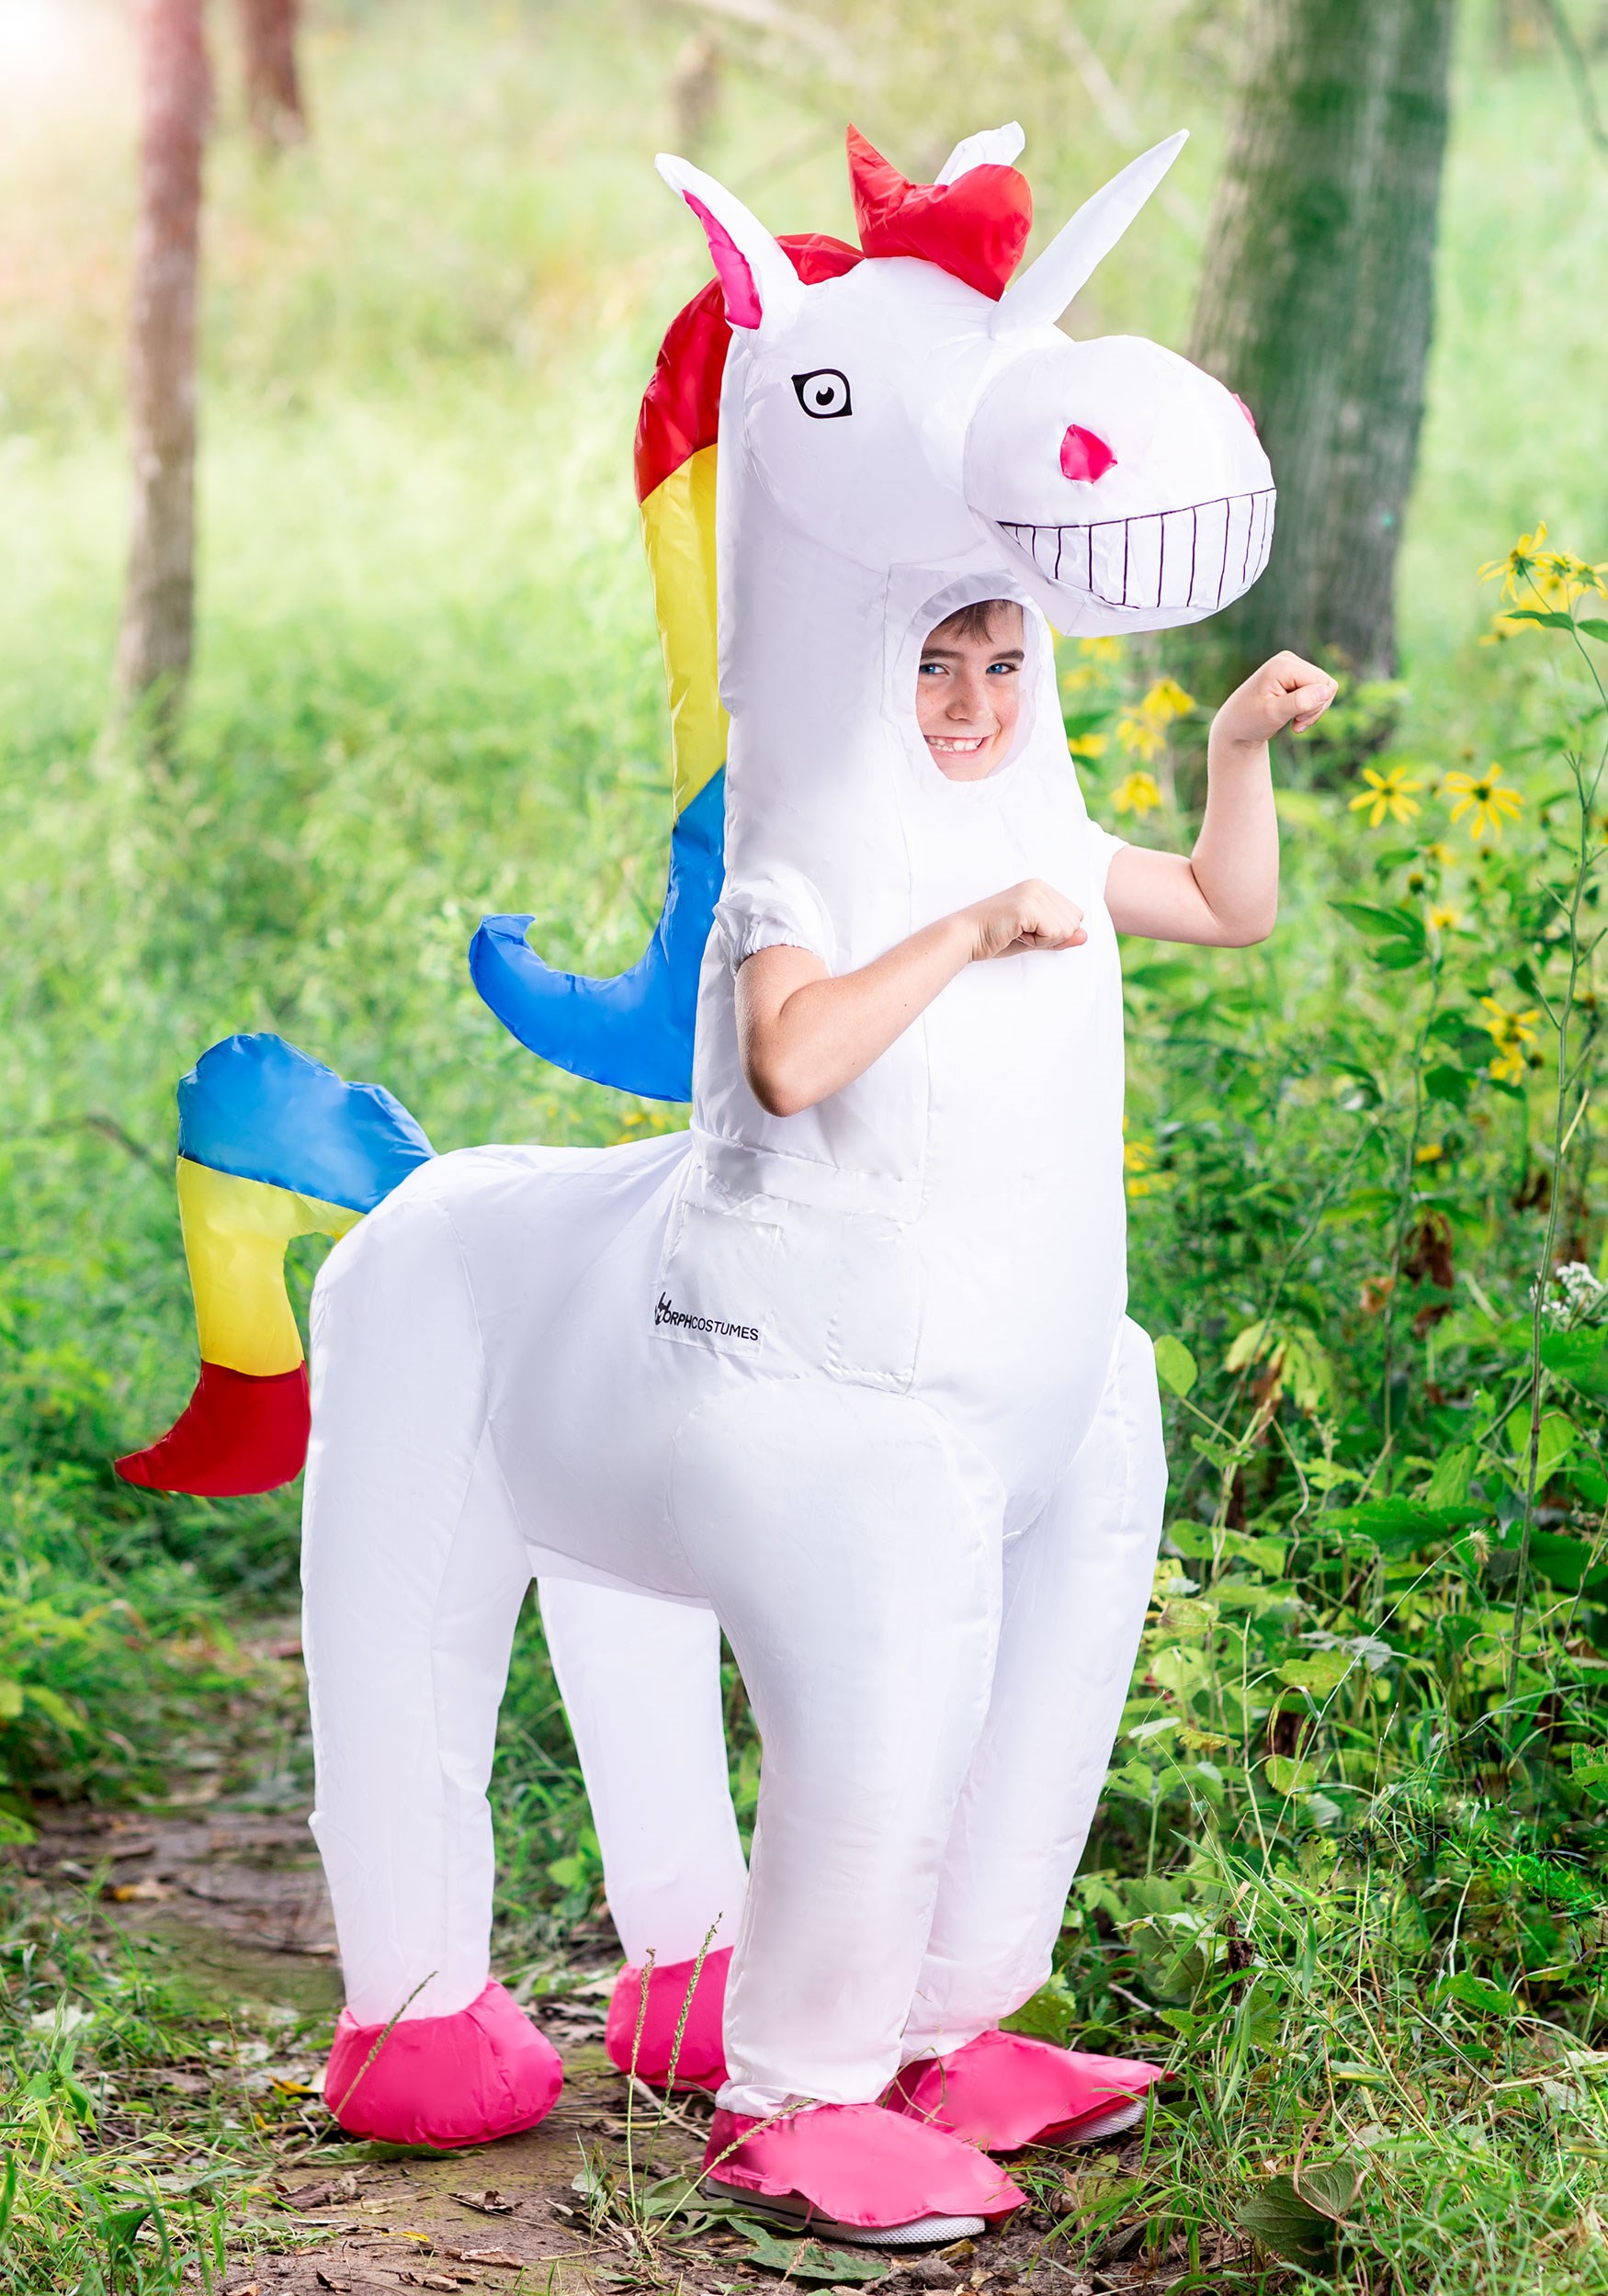 Giant Inflatable Unicorn Costume For A Child